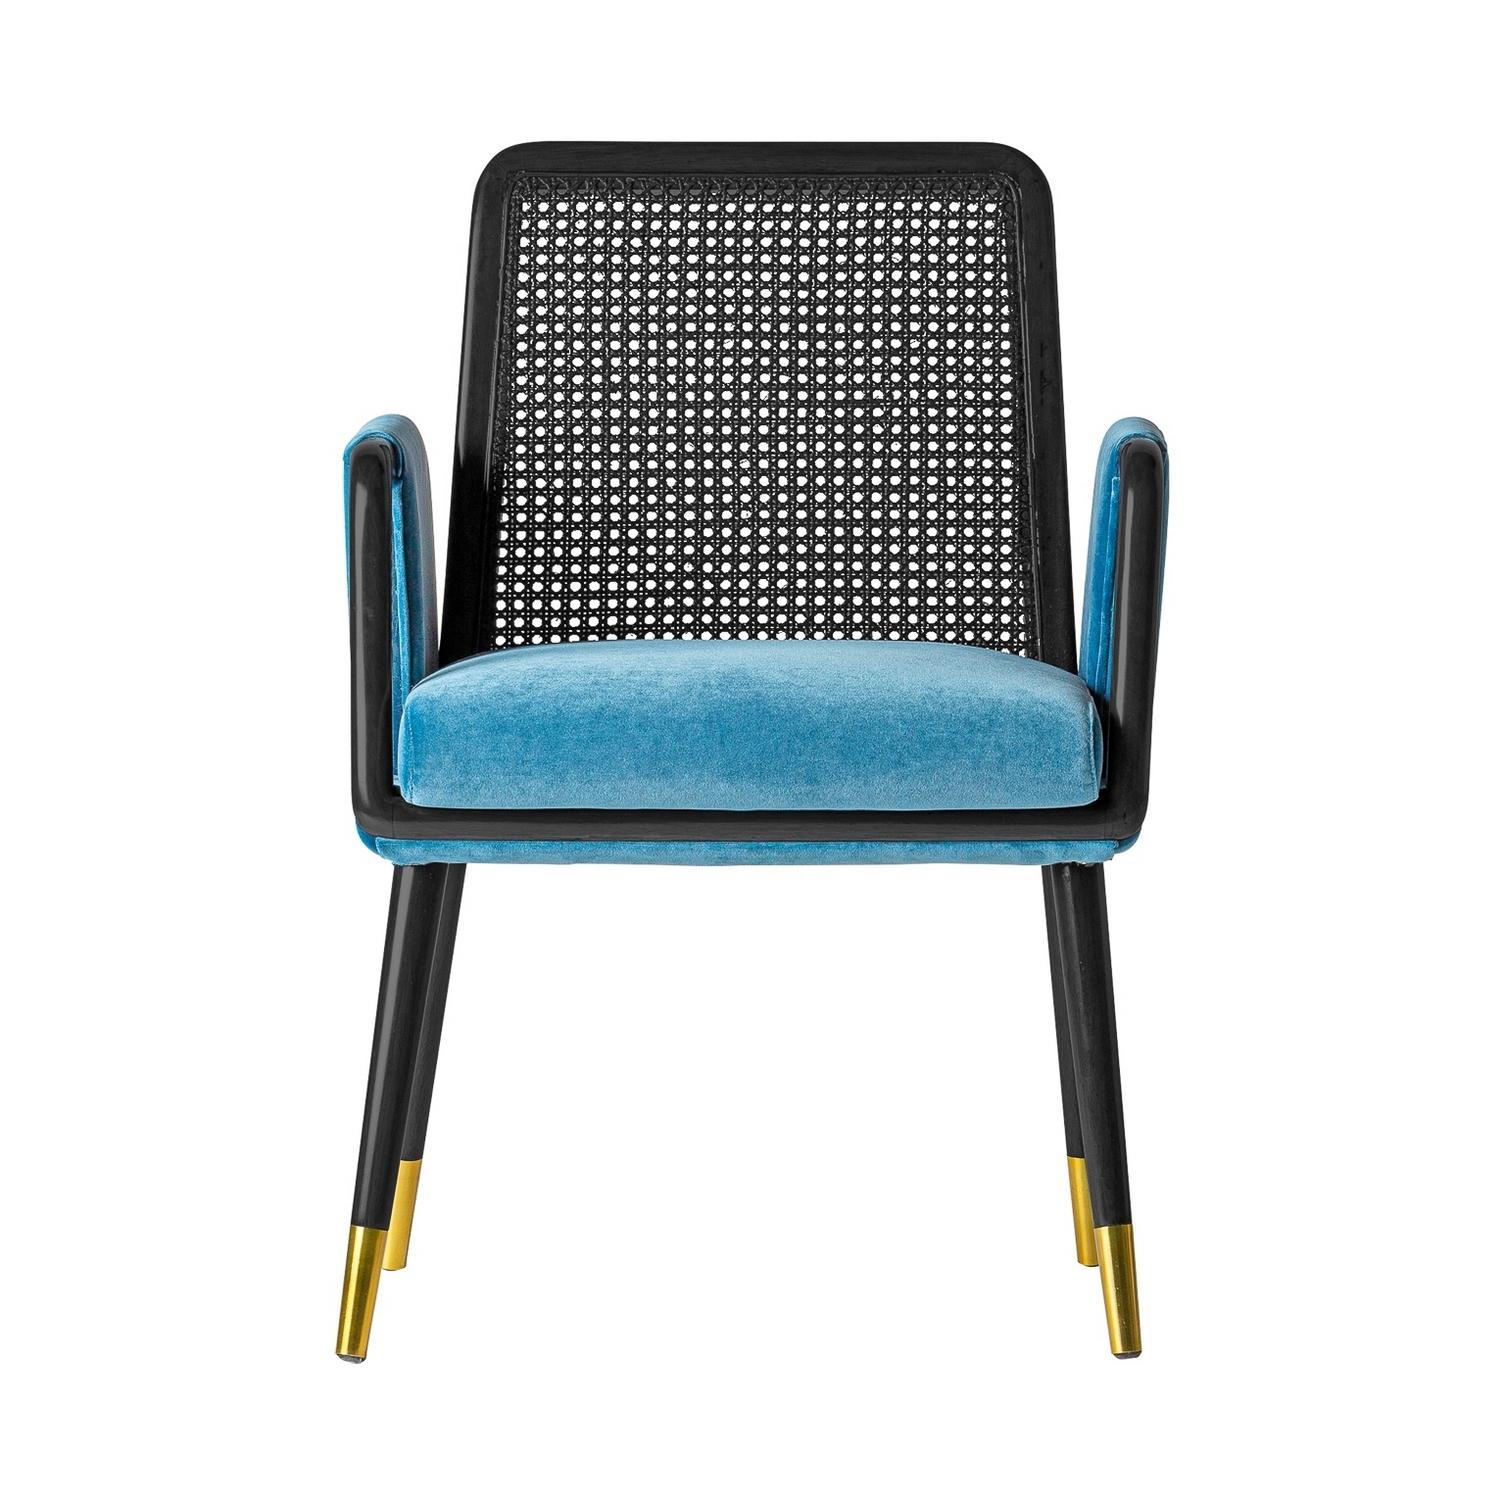 Contemporary MCM Style Black Lacquer Walnut and Black Lacquer Cane with Blue Velvet Chair